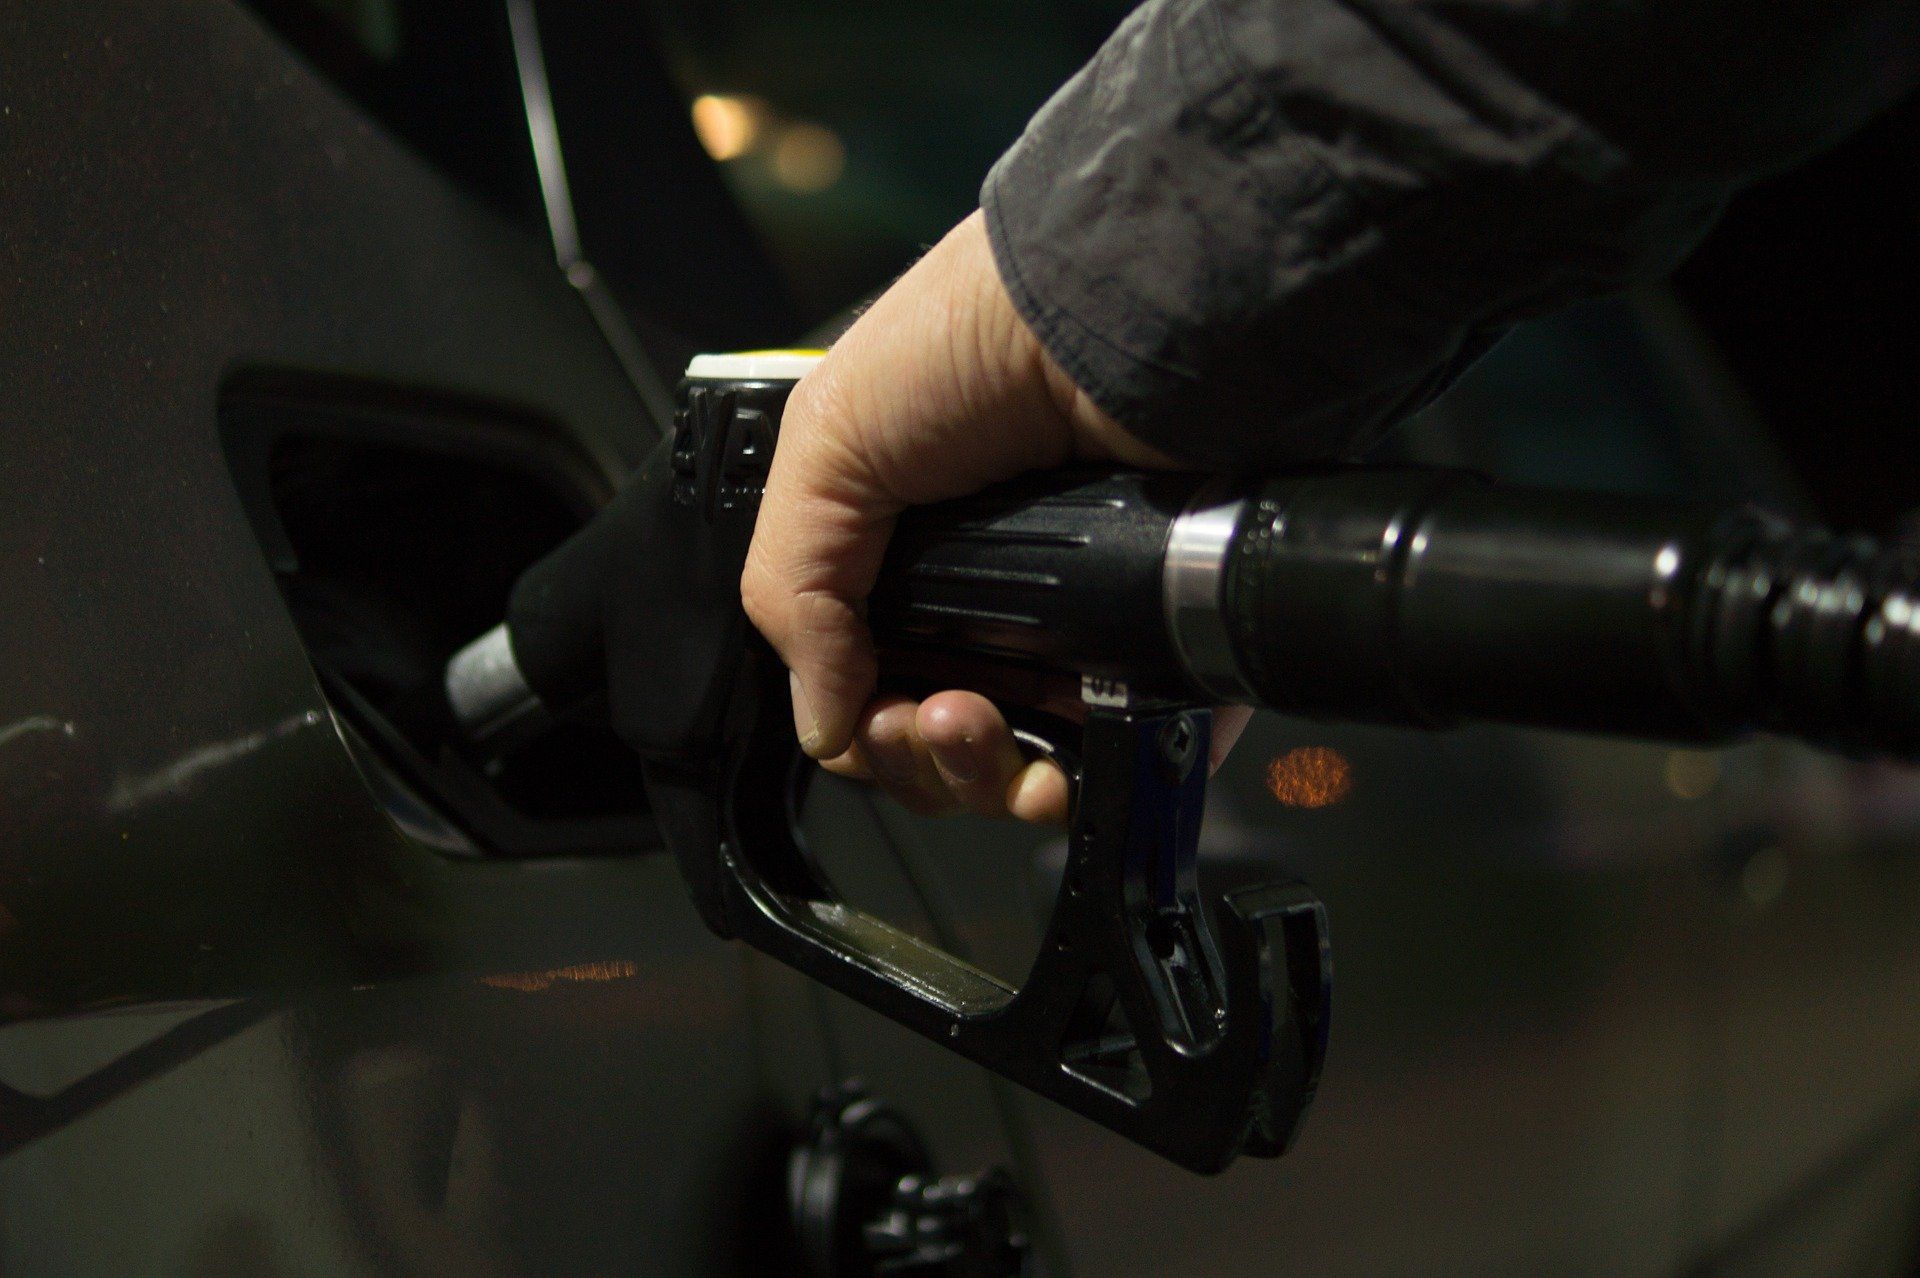 Fuel price today: Petrol and Diesel rates remain unchanged on April 12, 2022